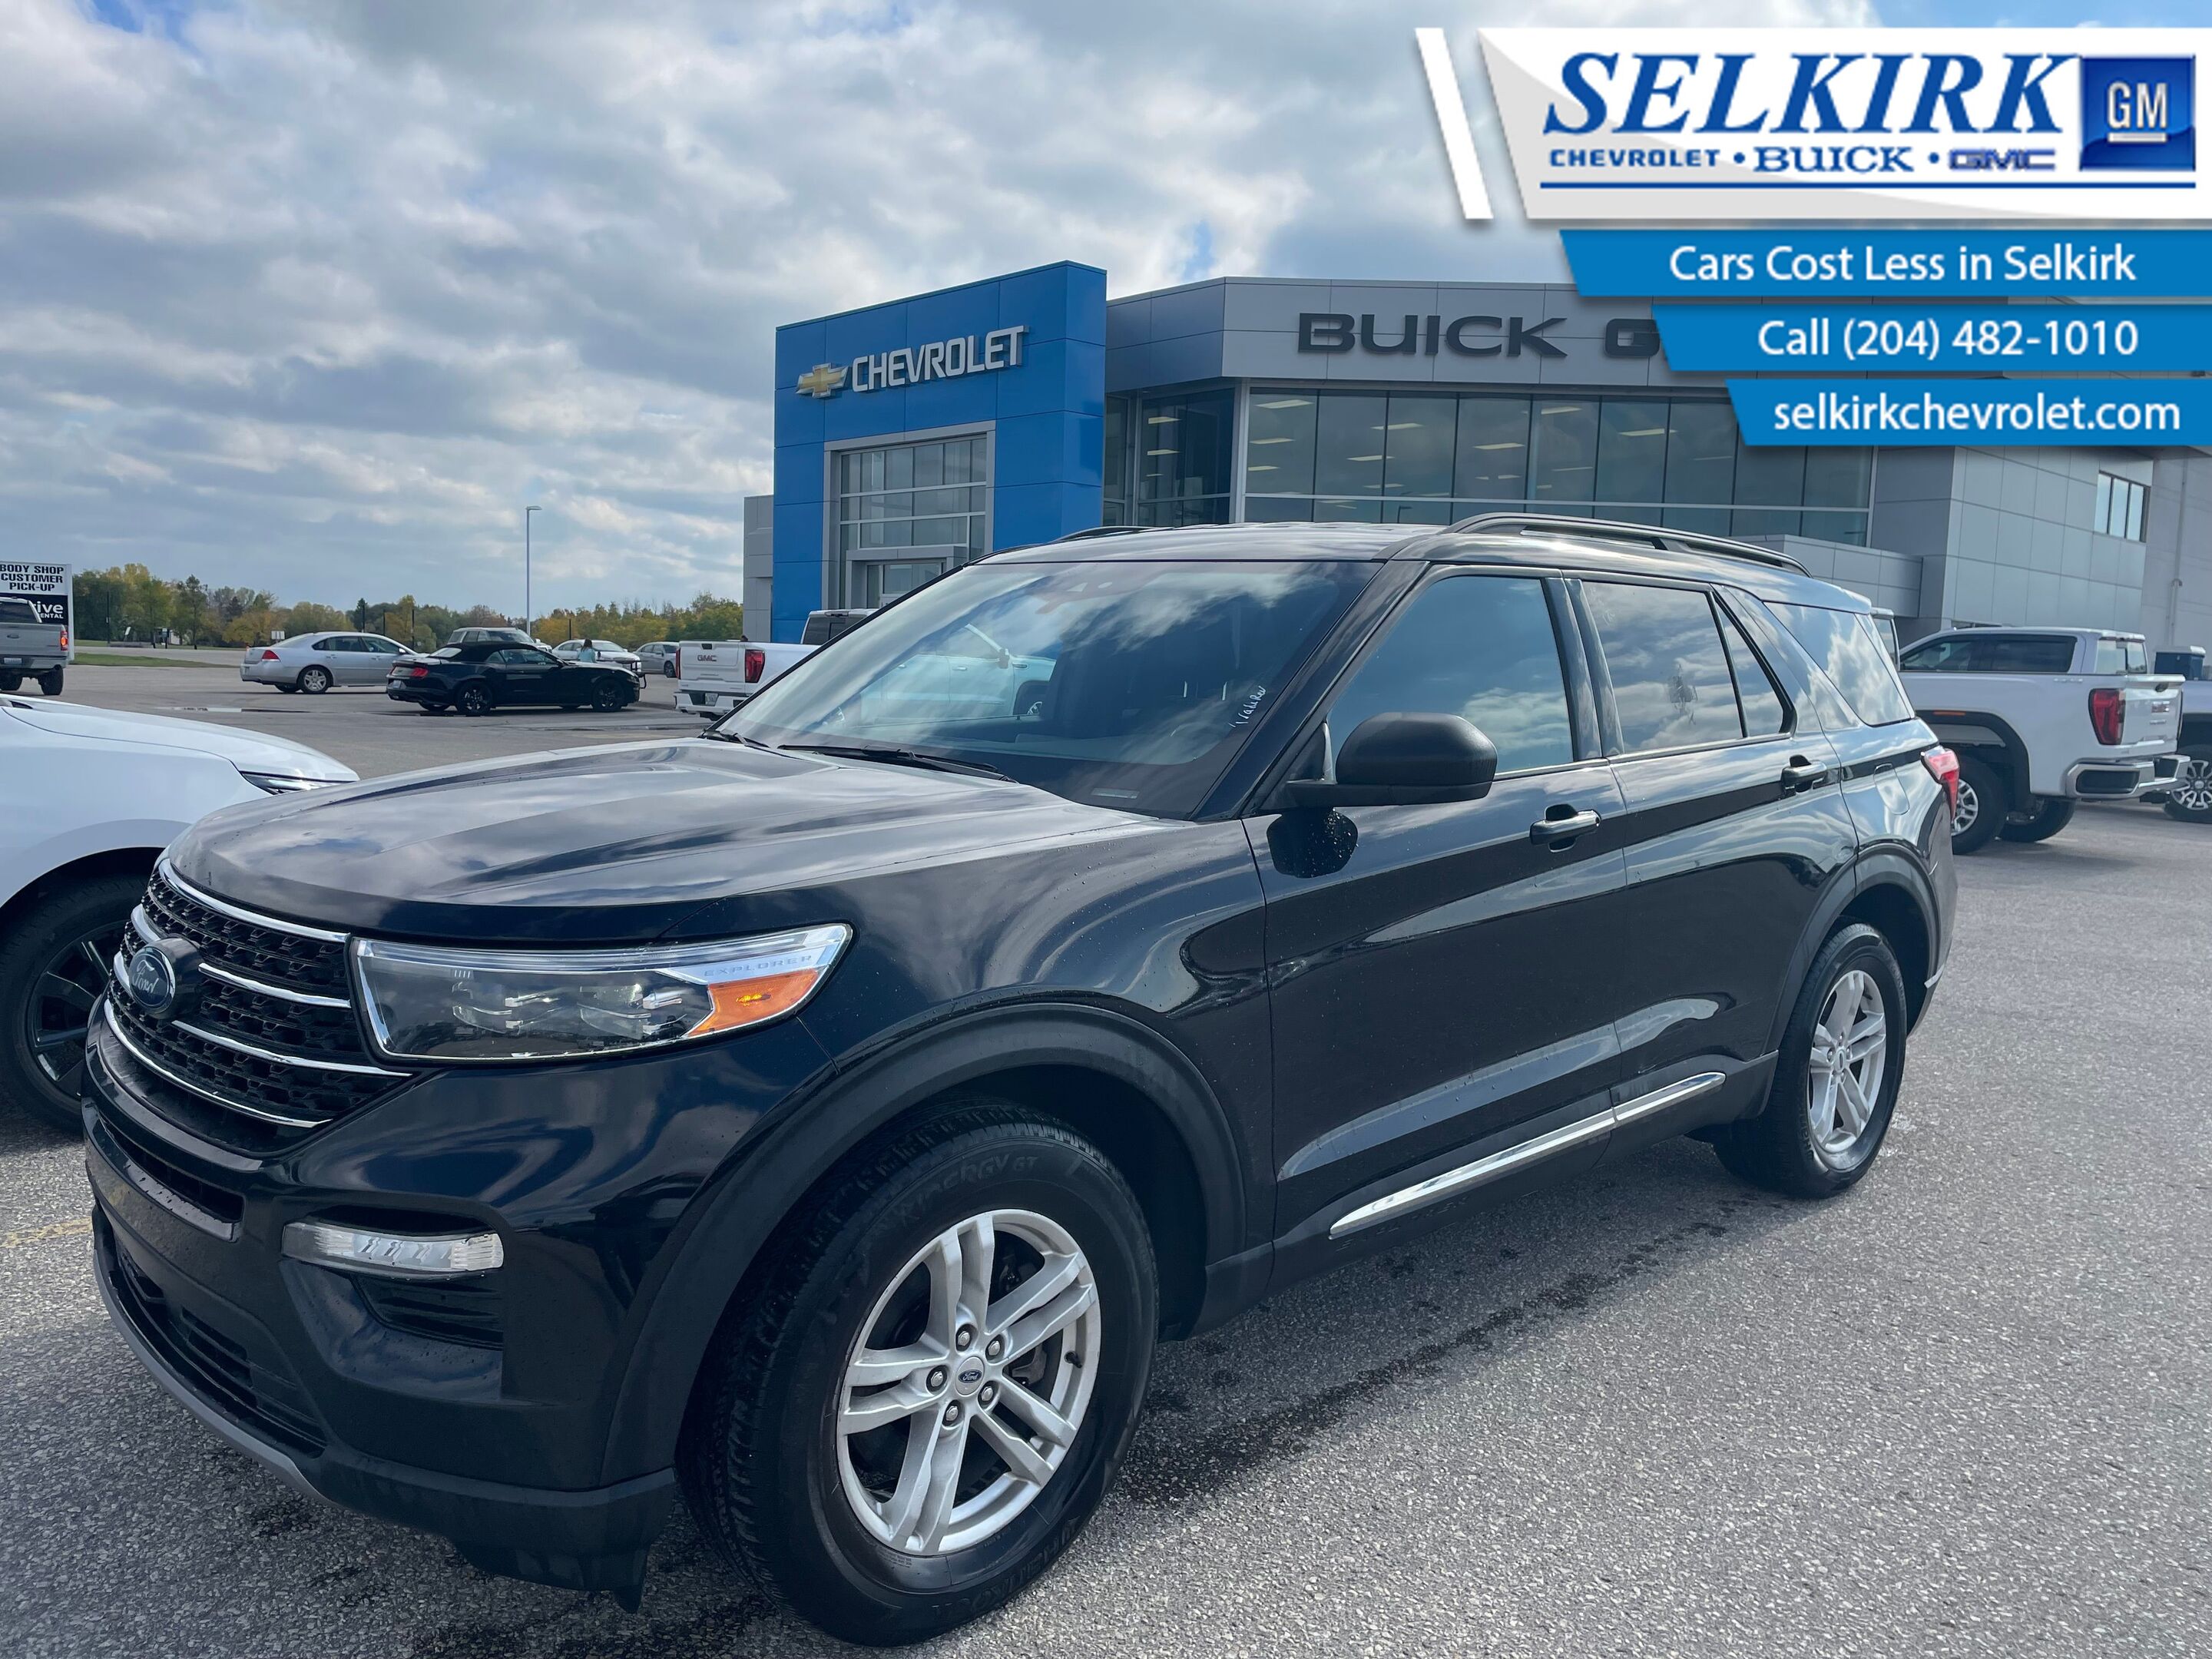 2020 Ford Explorer XLT AWD | 202A | LEATHER | HEATED SEATS | PWR LIFT